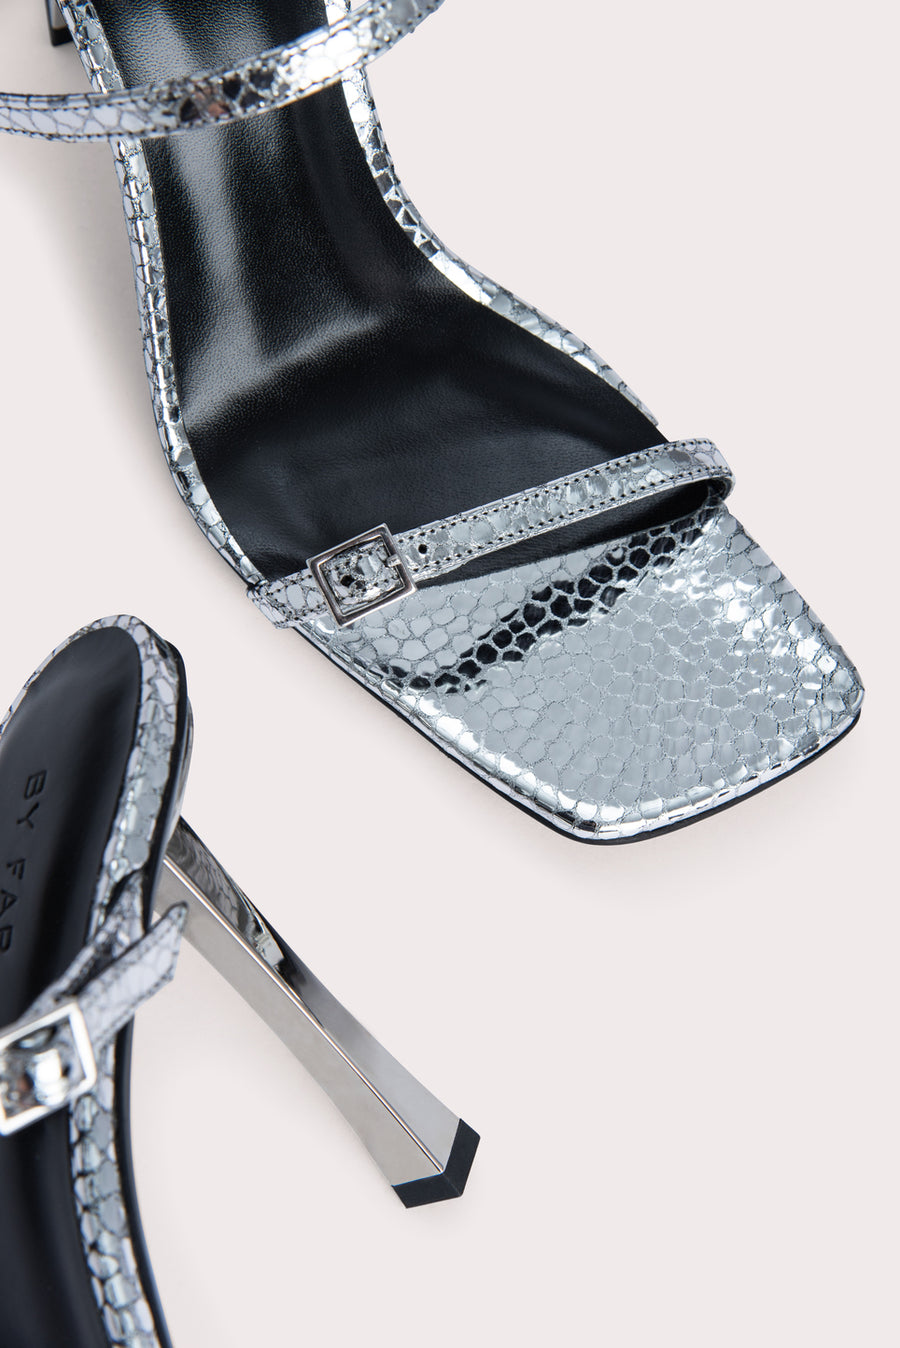 Slip these on and your outfit is instantly elevated. The 'Flick' heel is crafted from a silver flagstone leather and has mini buckles that can be adjusted. Pair with a frayed straight leg denim and a bustier to complete the look.